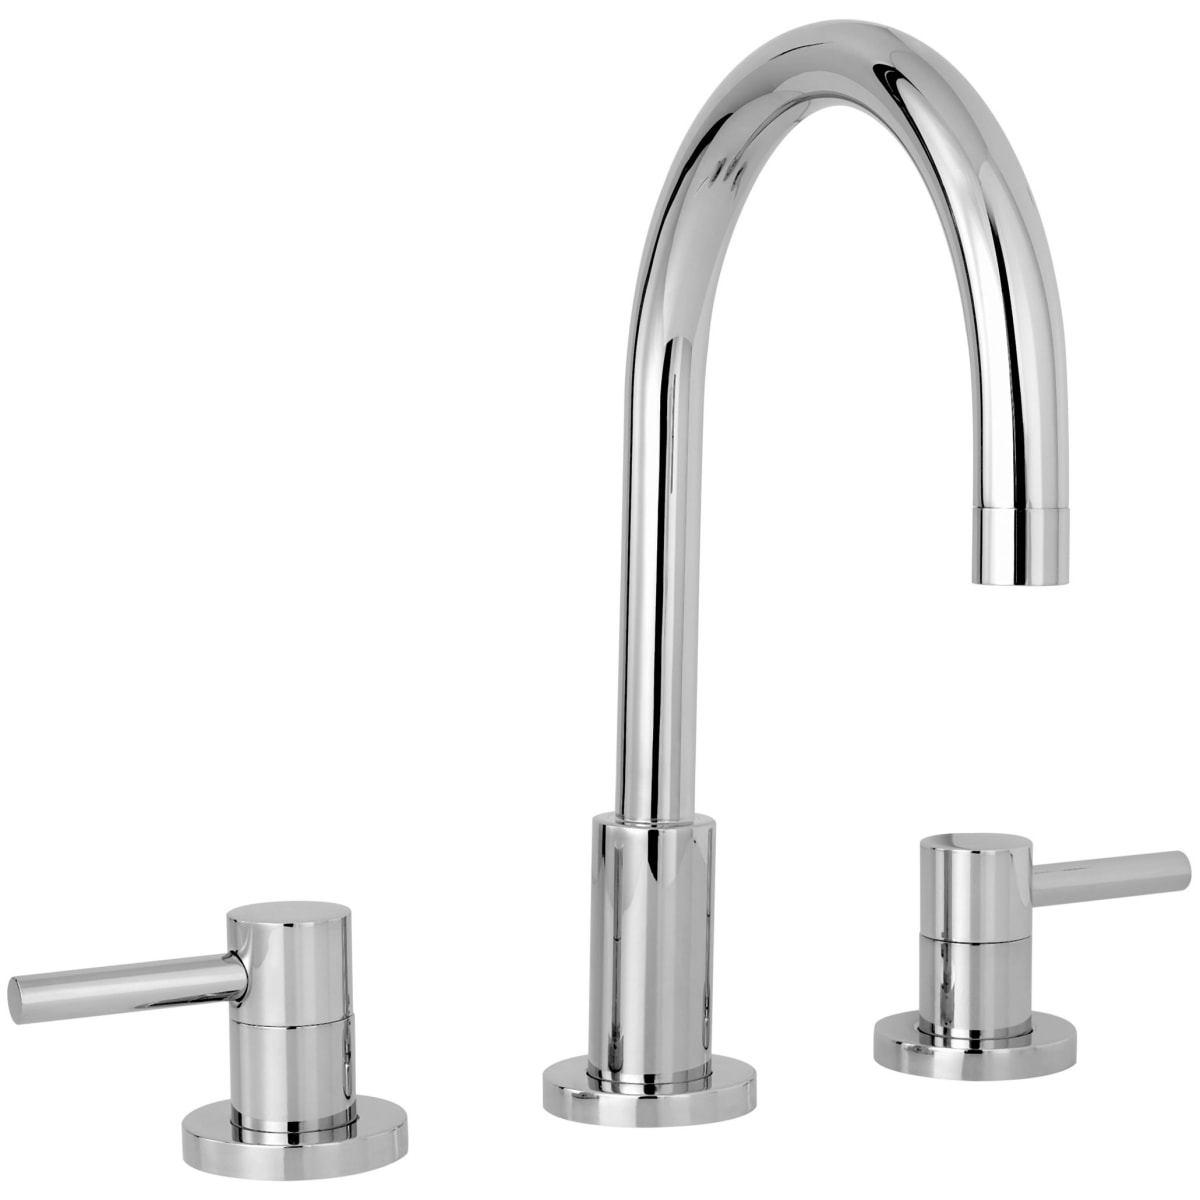 Newport Brass East Linear Double Handle Hot and Cold Water